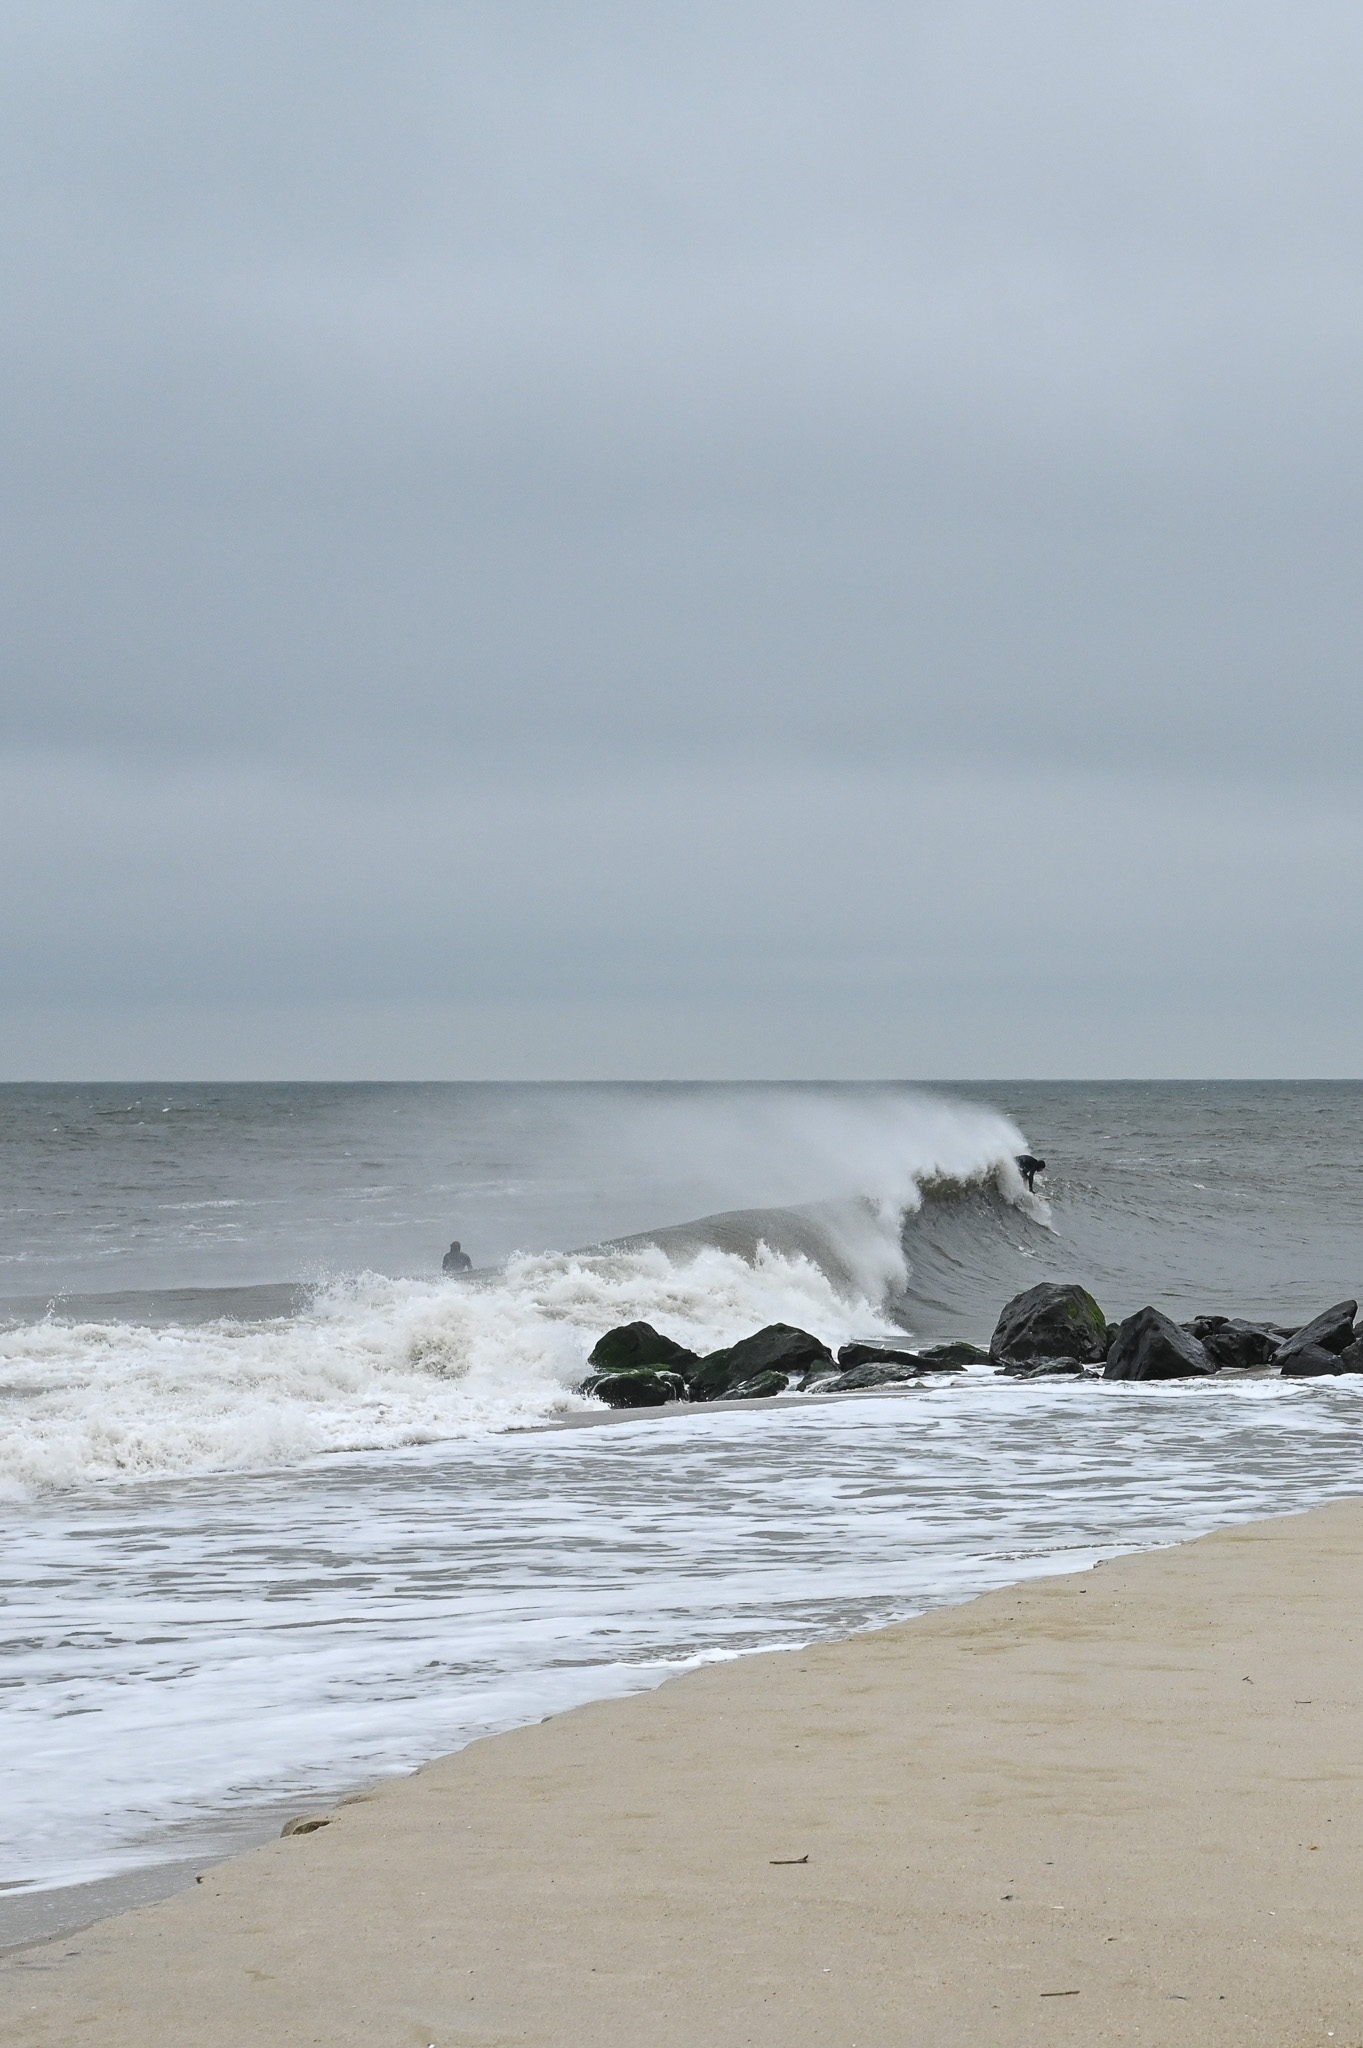 People surfing in Cape May.